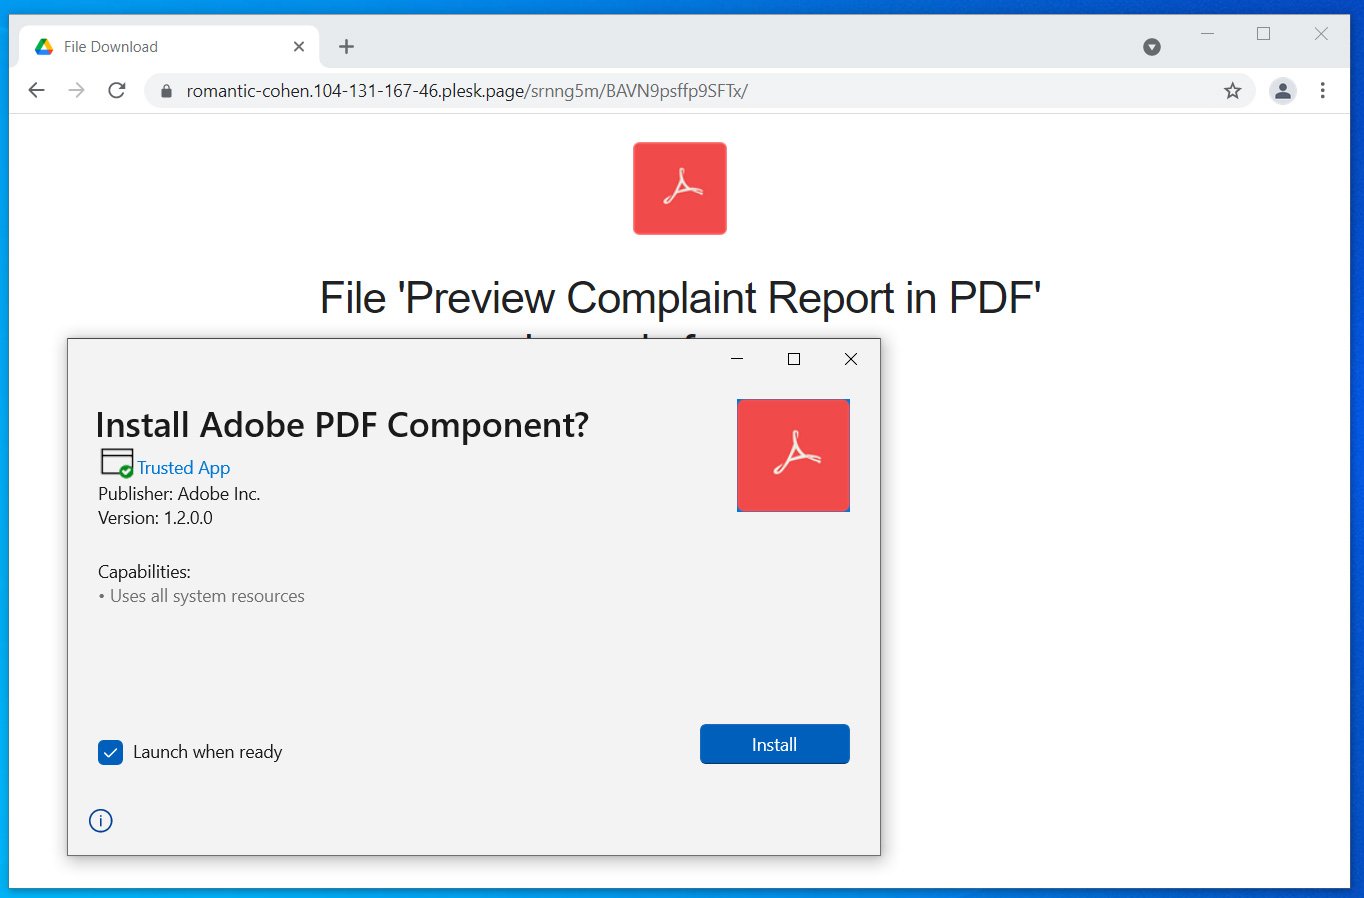 App Installer prompting to install the Fake Adobe PDF Component